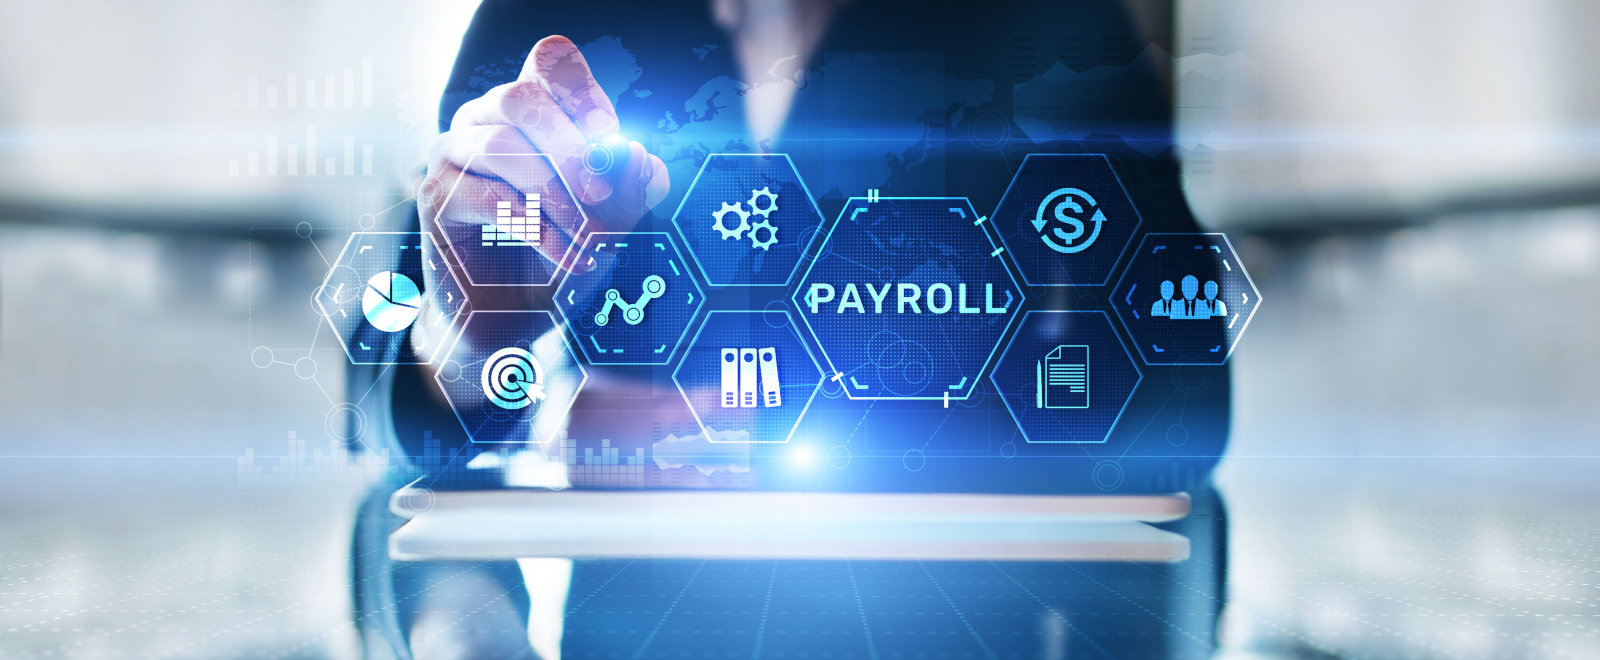 YouRecruit integration with payroll systems